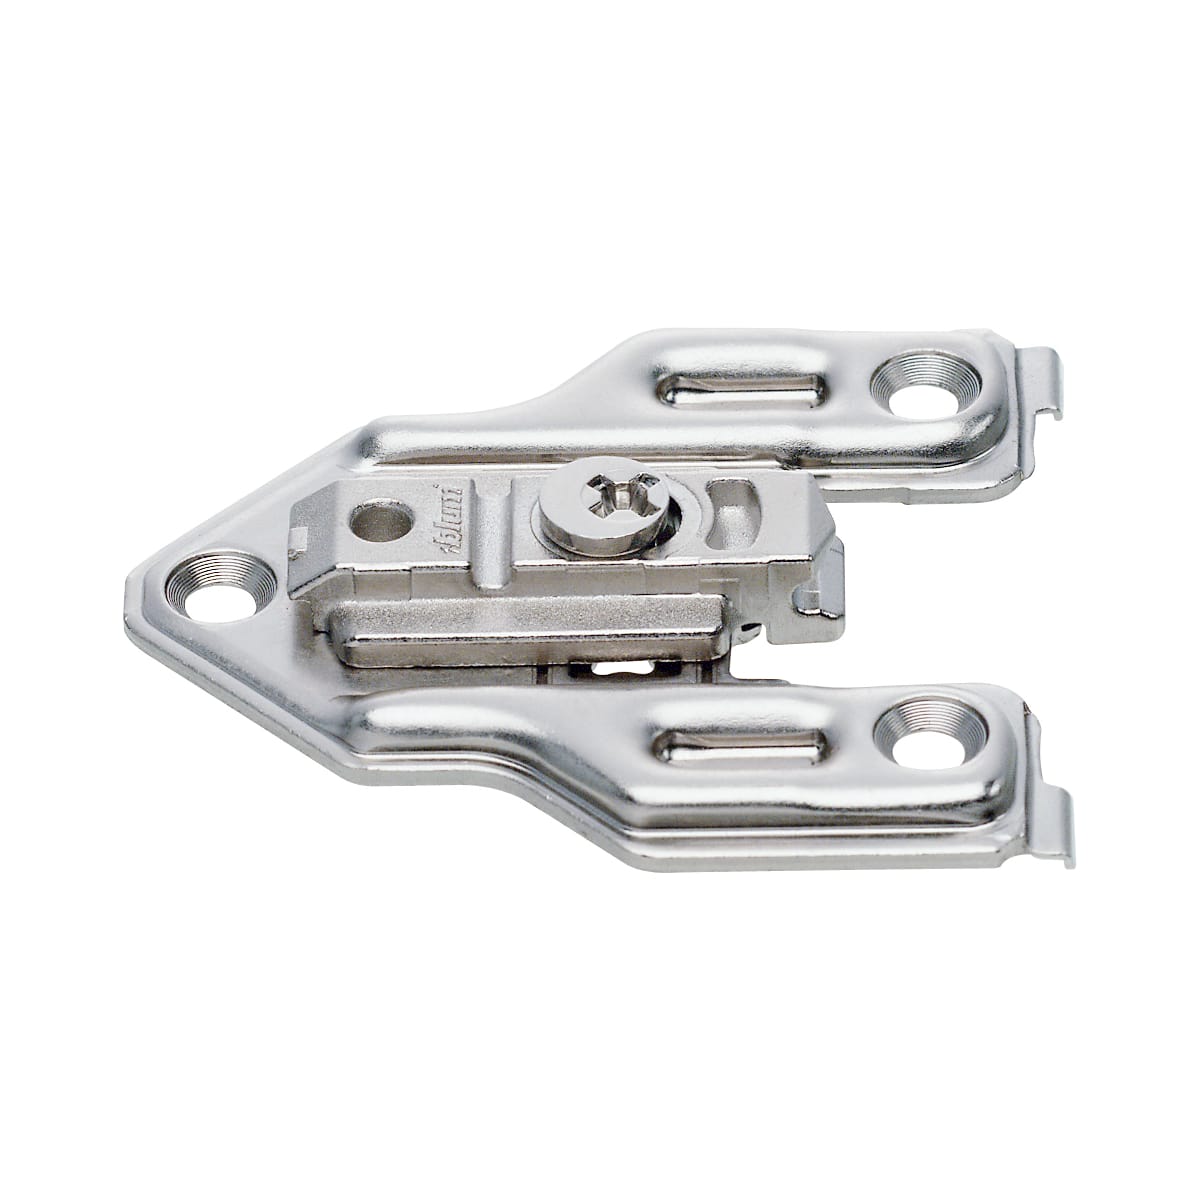 Blum Inc 175L6660.22 6mm Face Frame Clip Mounting Plate Nickel Plated